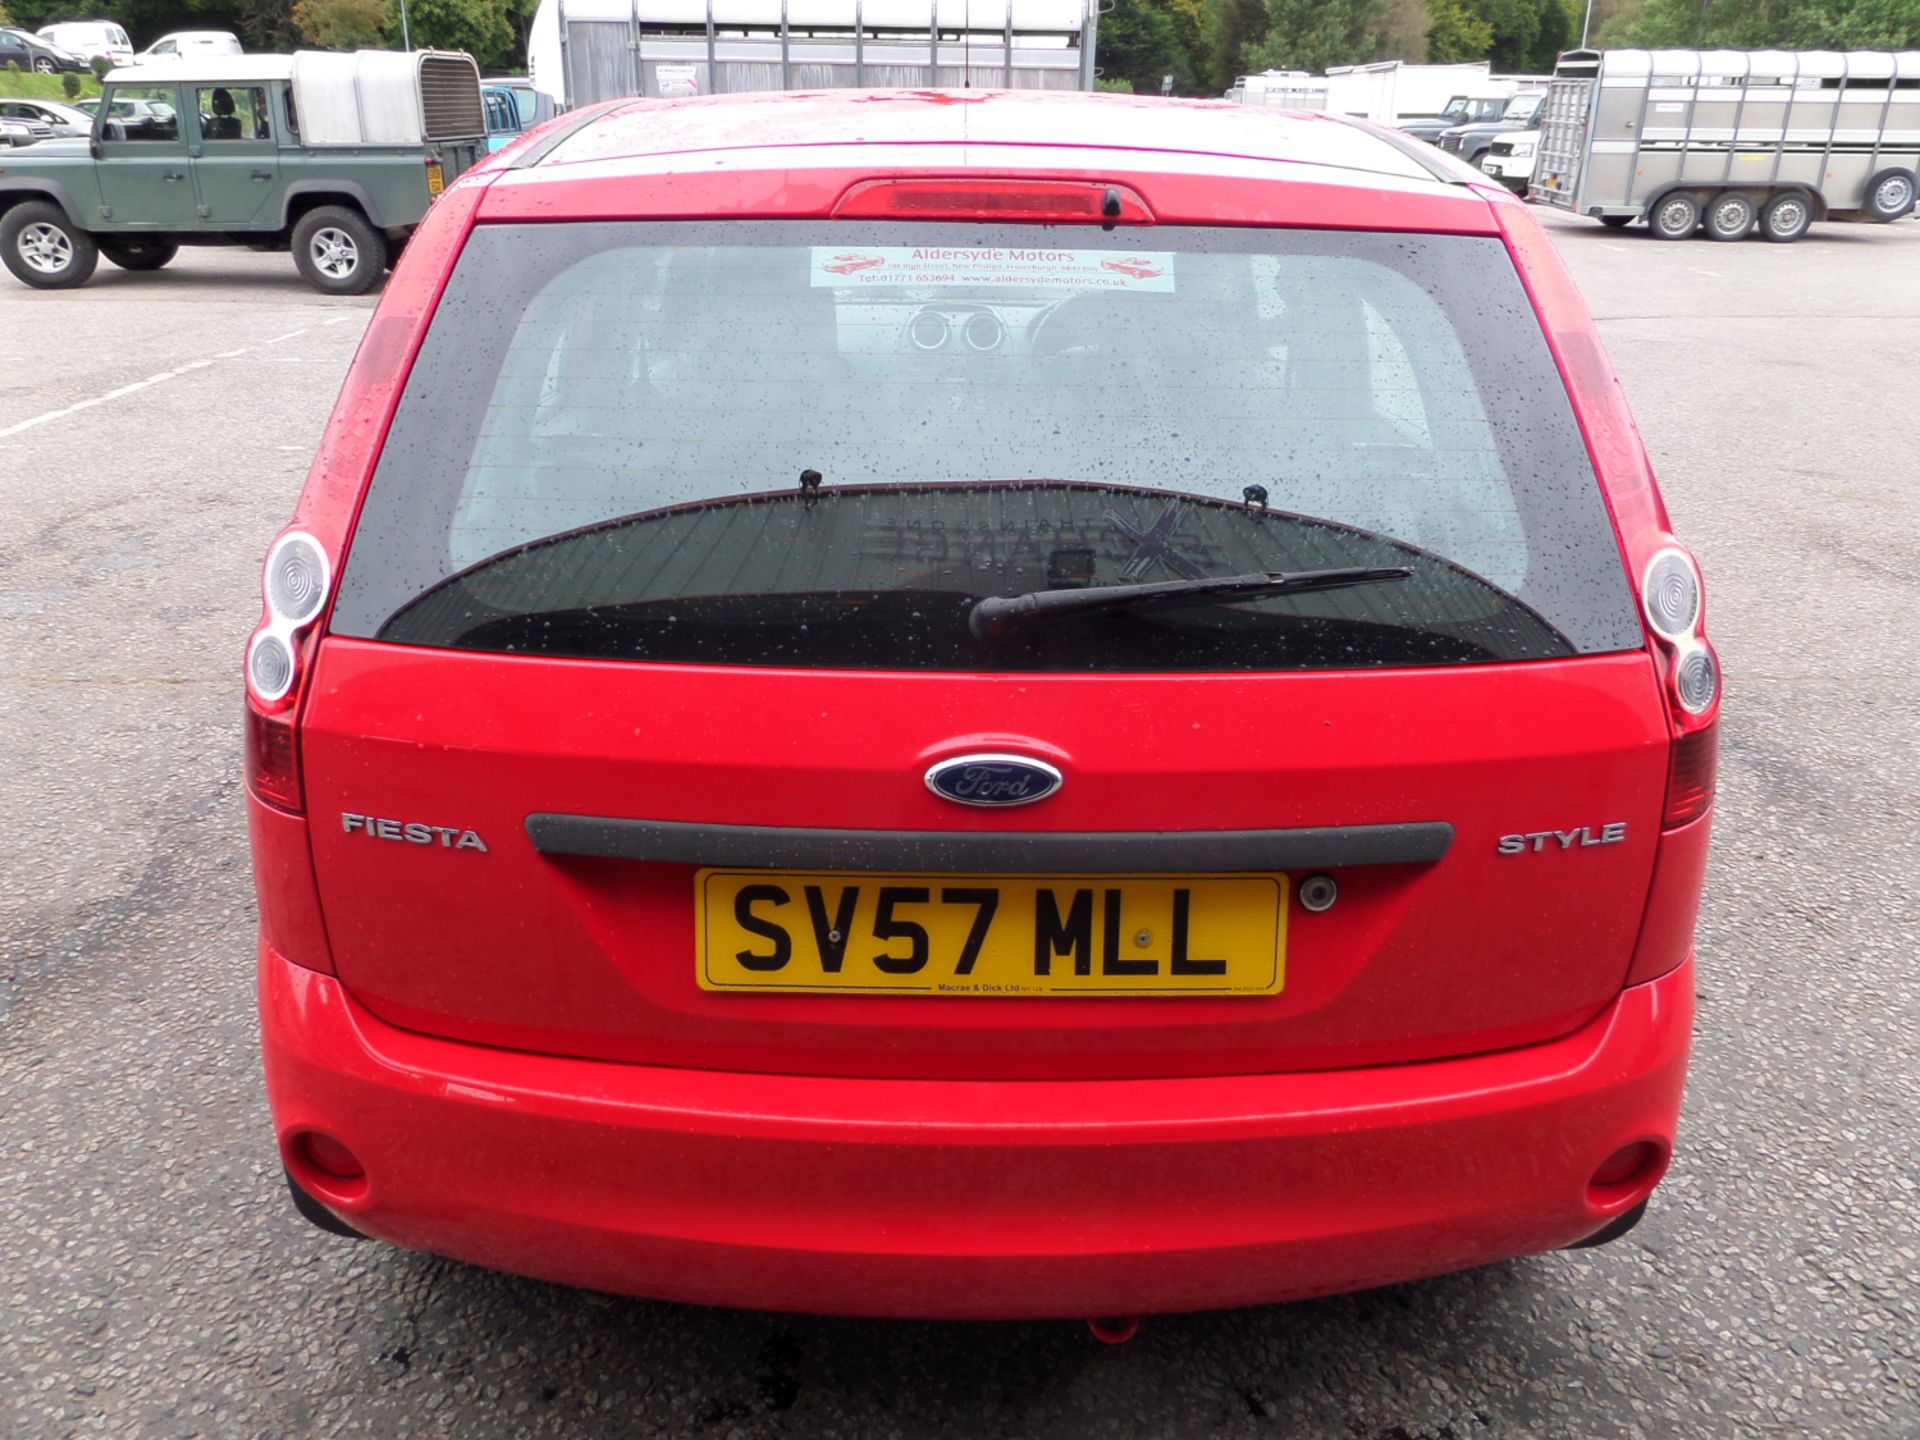 Ford Fiesta Style - 1242cc 5 Door - Image 4 of 8